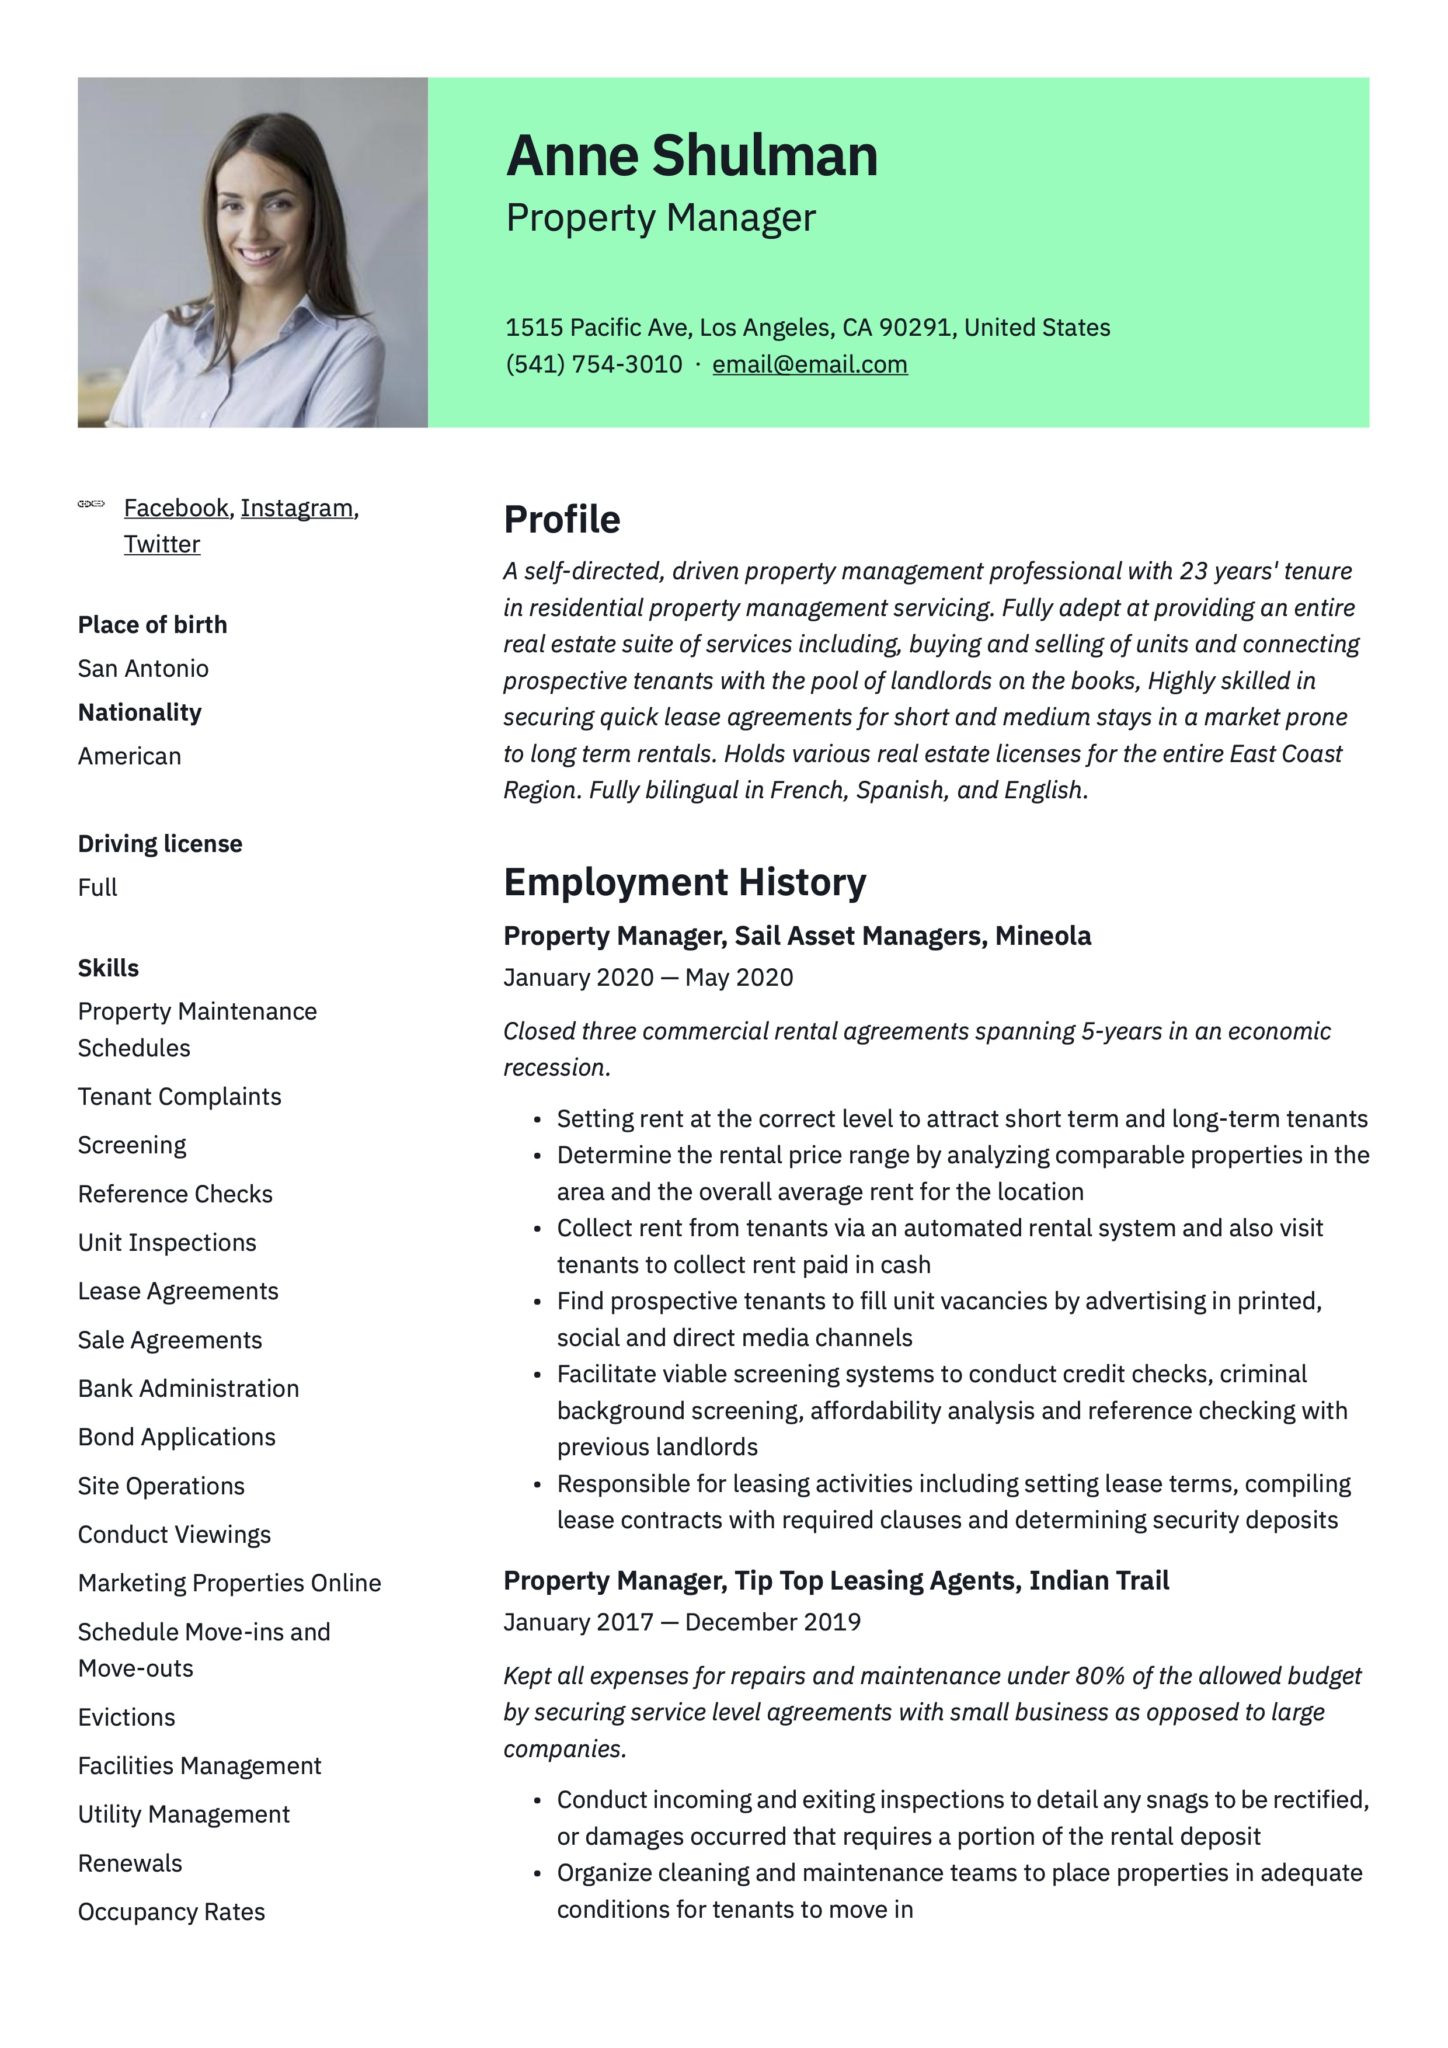 Sample Resume for Residential Property Manager Property Manager Resume & Writing Guide  18 Templates 2020